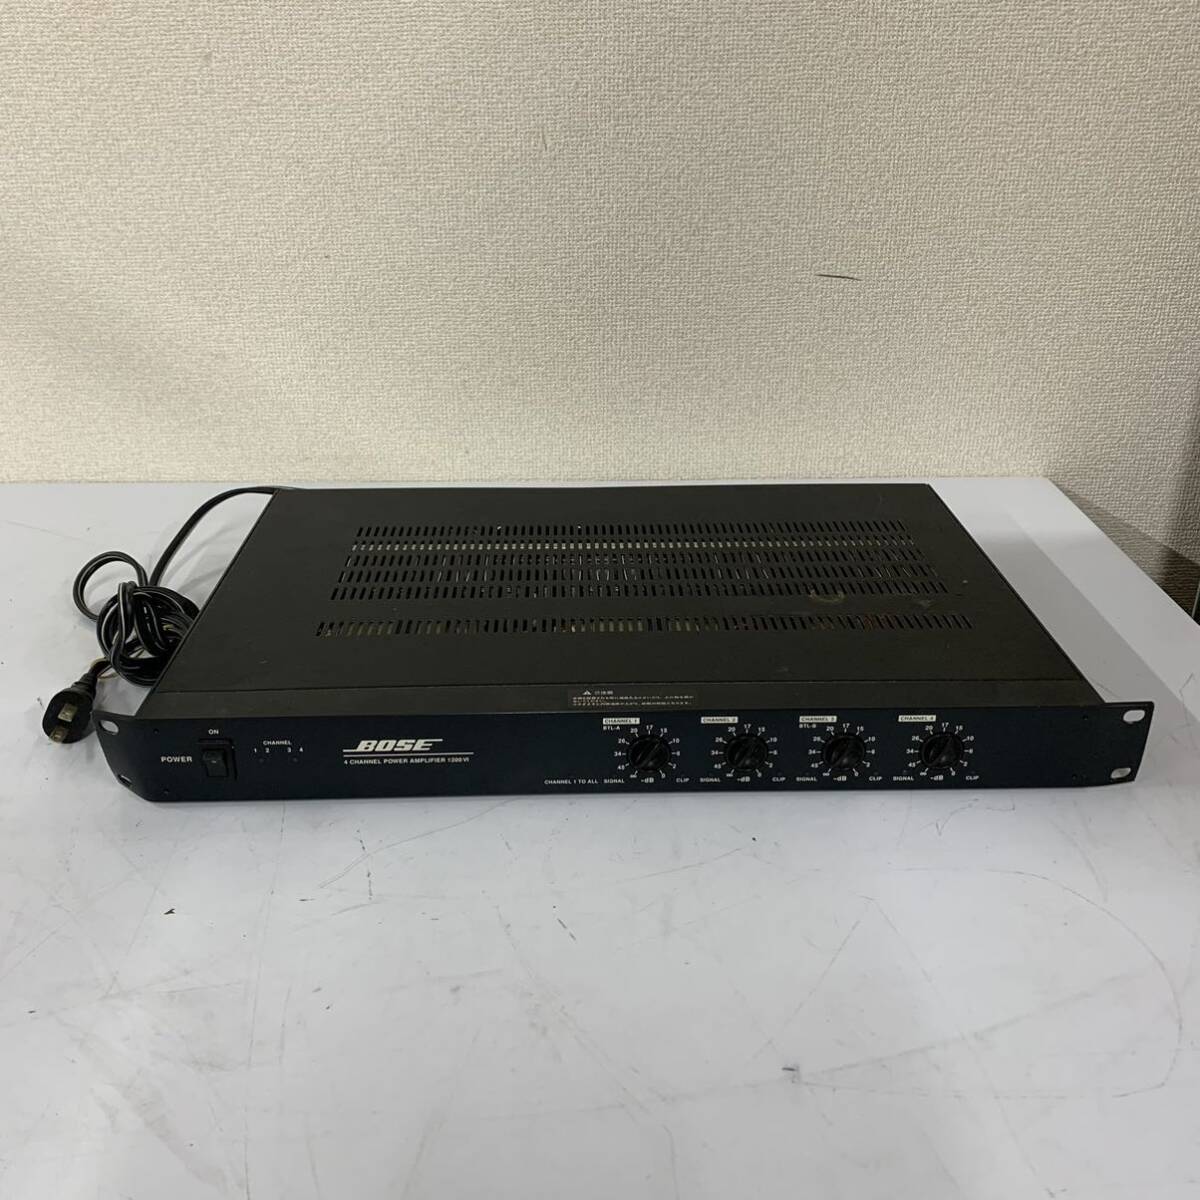 [B-3] Bose 1200 VI power amplifier operation verification settled rack mount part deformation dirt equipped scratch equipped bow z secondhand goods 1620-16